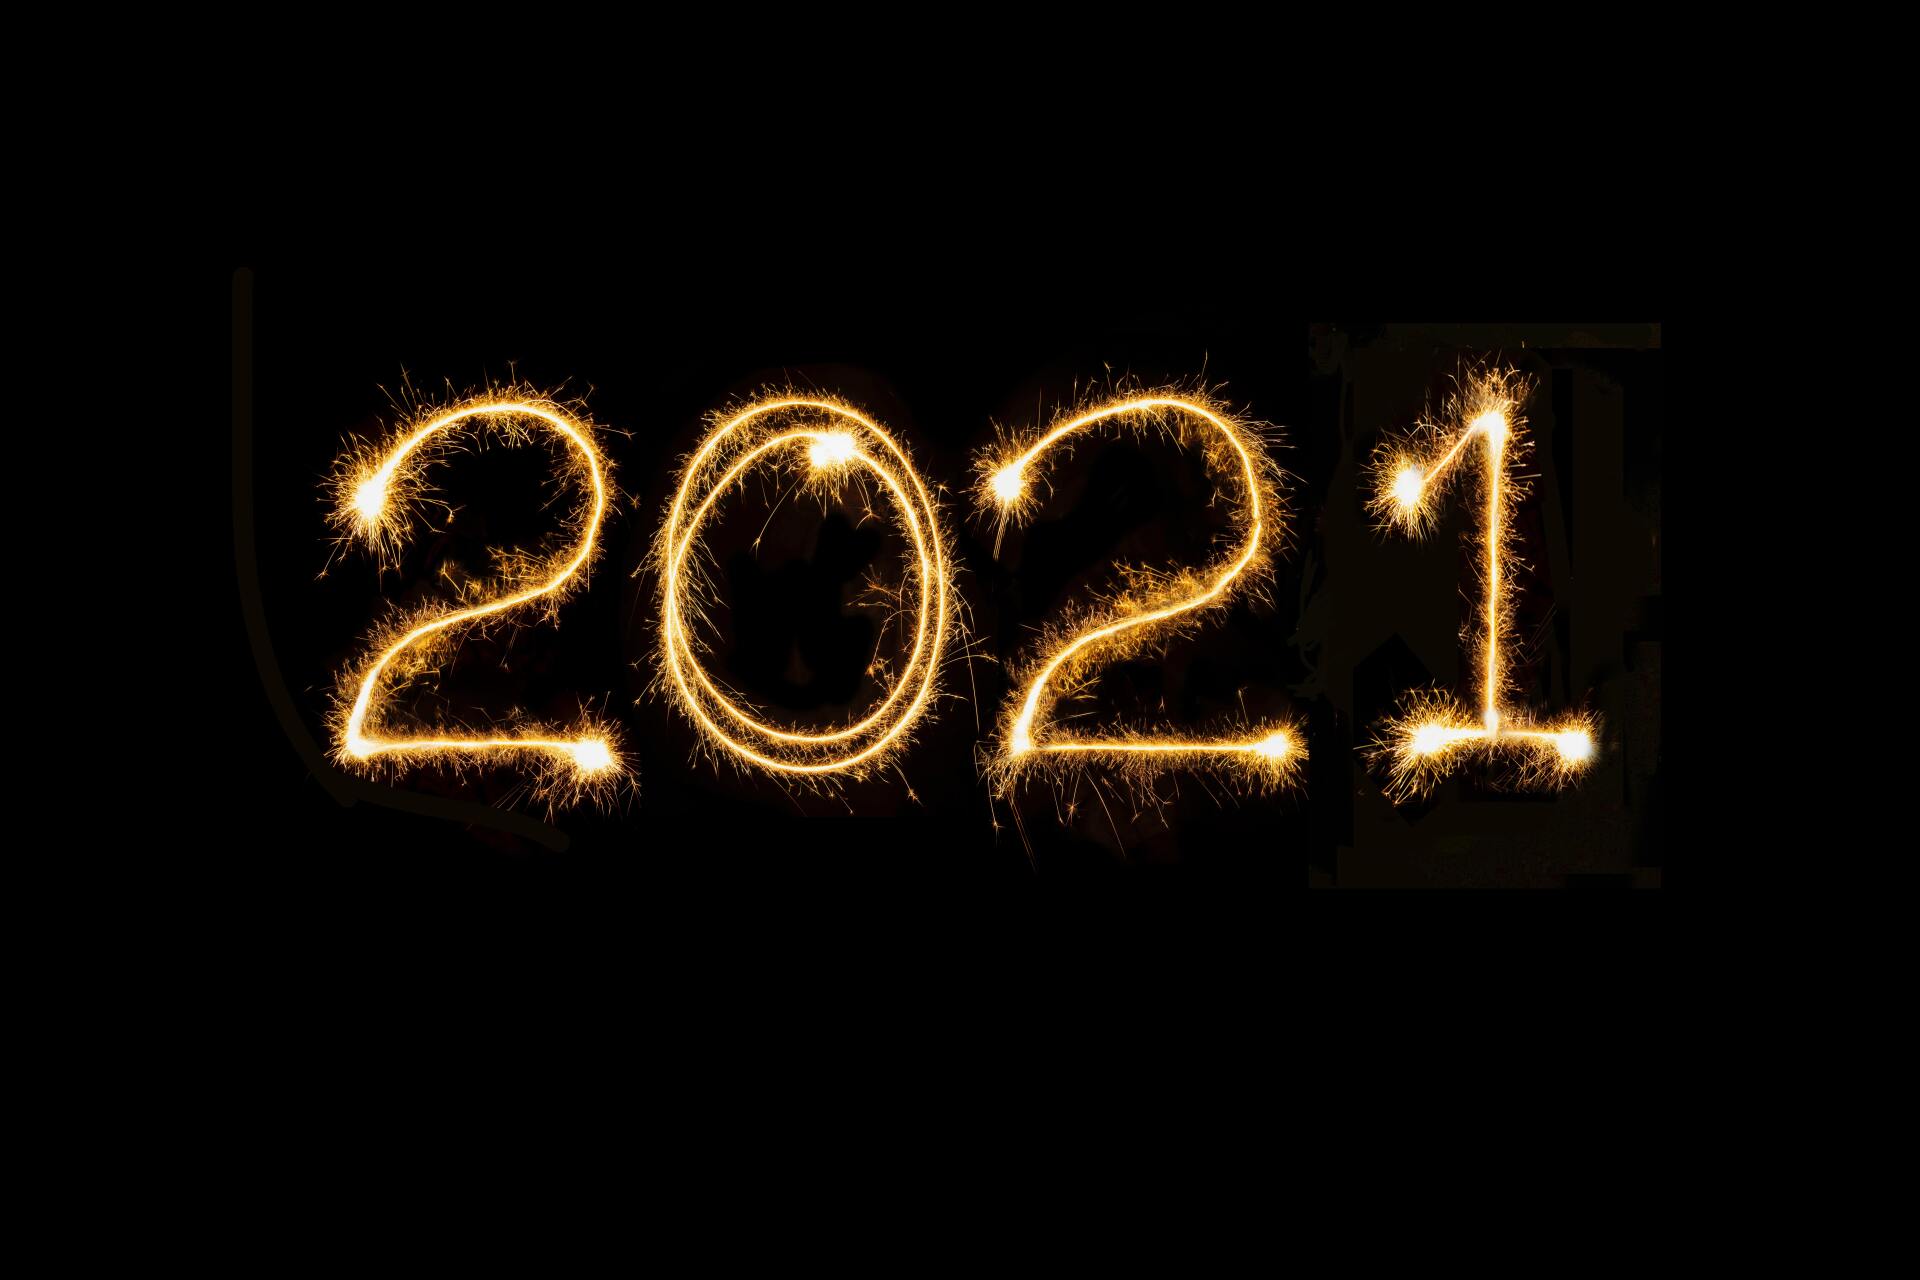 The year 2021 is written with sparklers